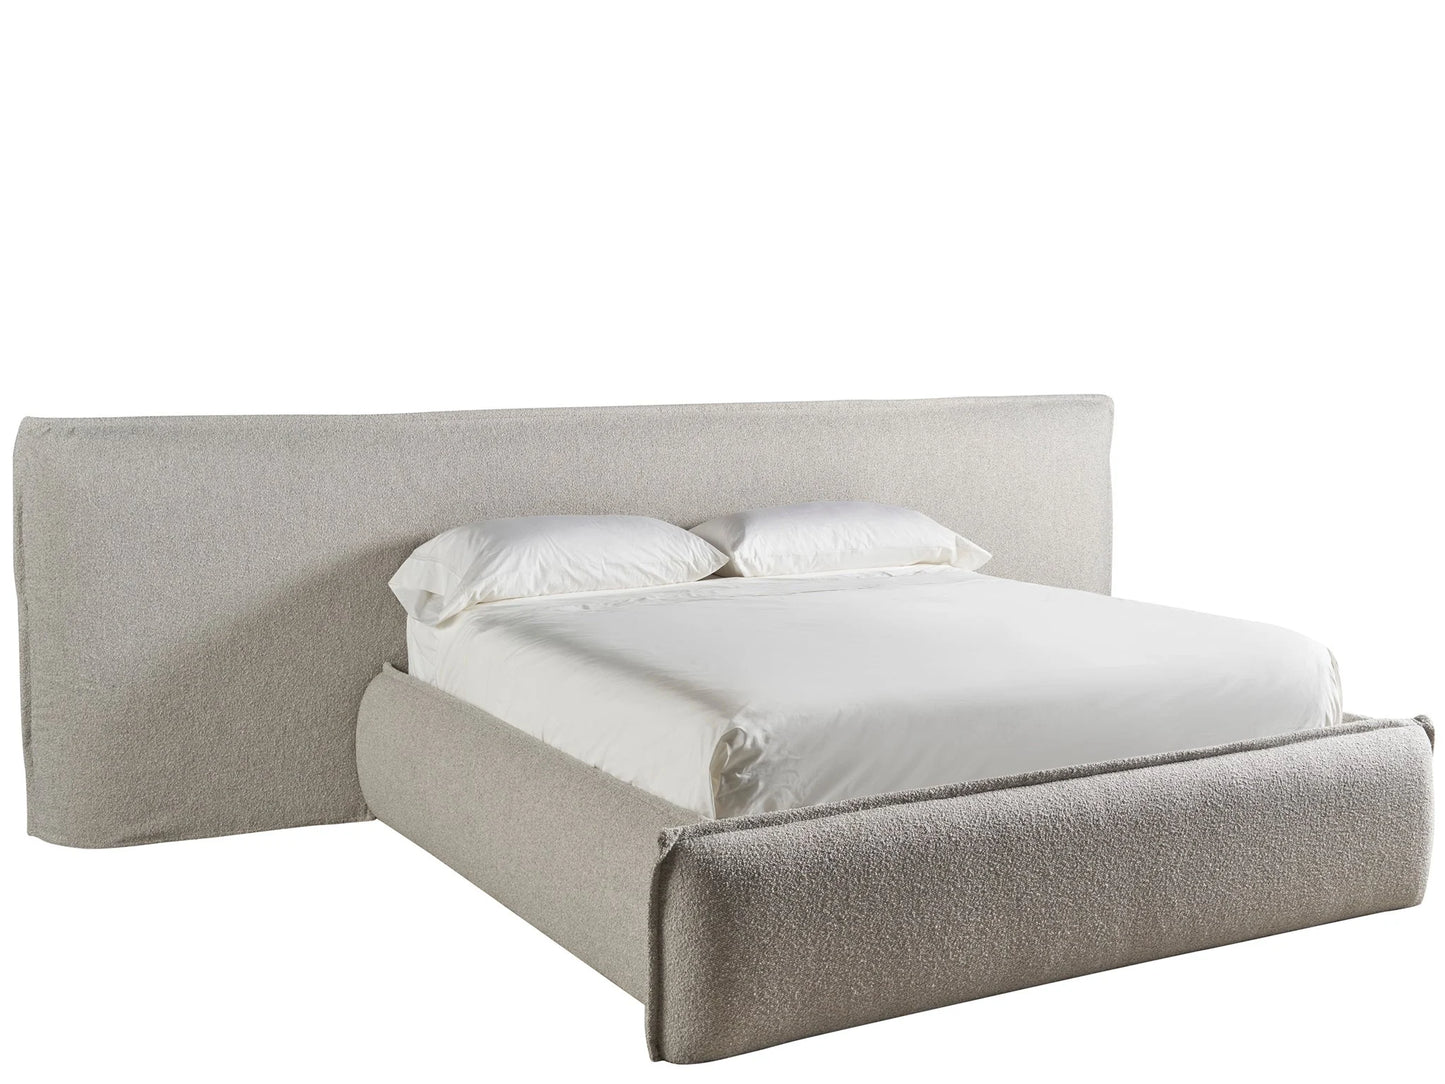 UNIVERSAL - NEW MODERN LUX WALL BED KING